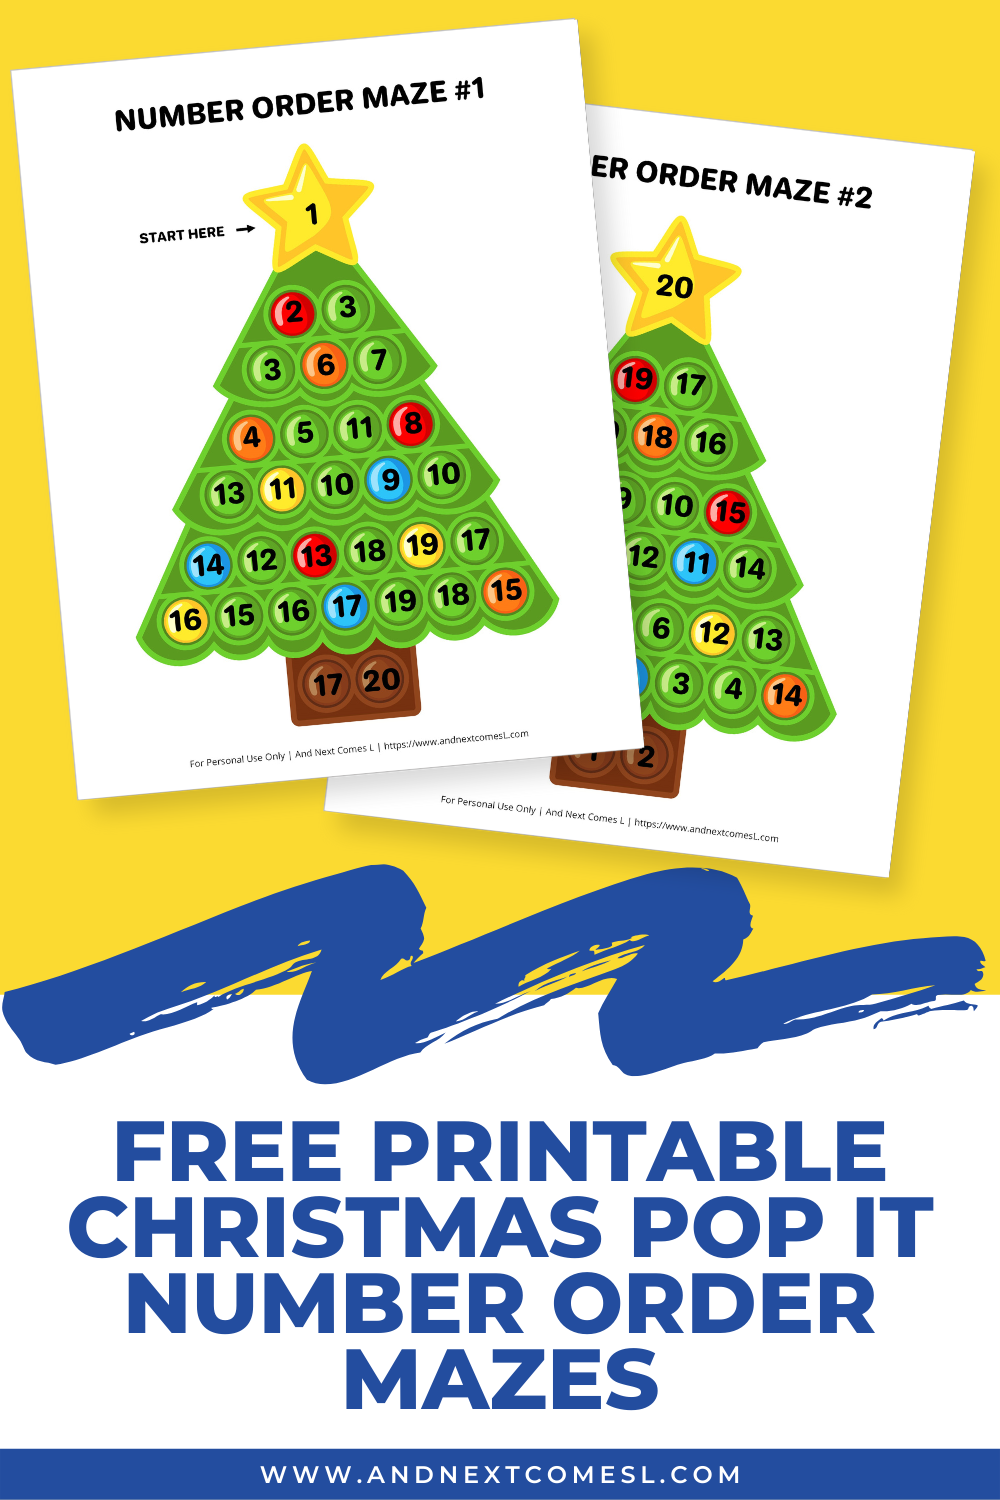 Free printable Christmas pop it number order mazes - a fun Christmas math activity for kids!